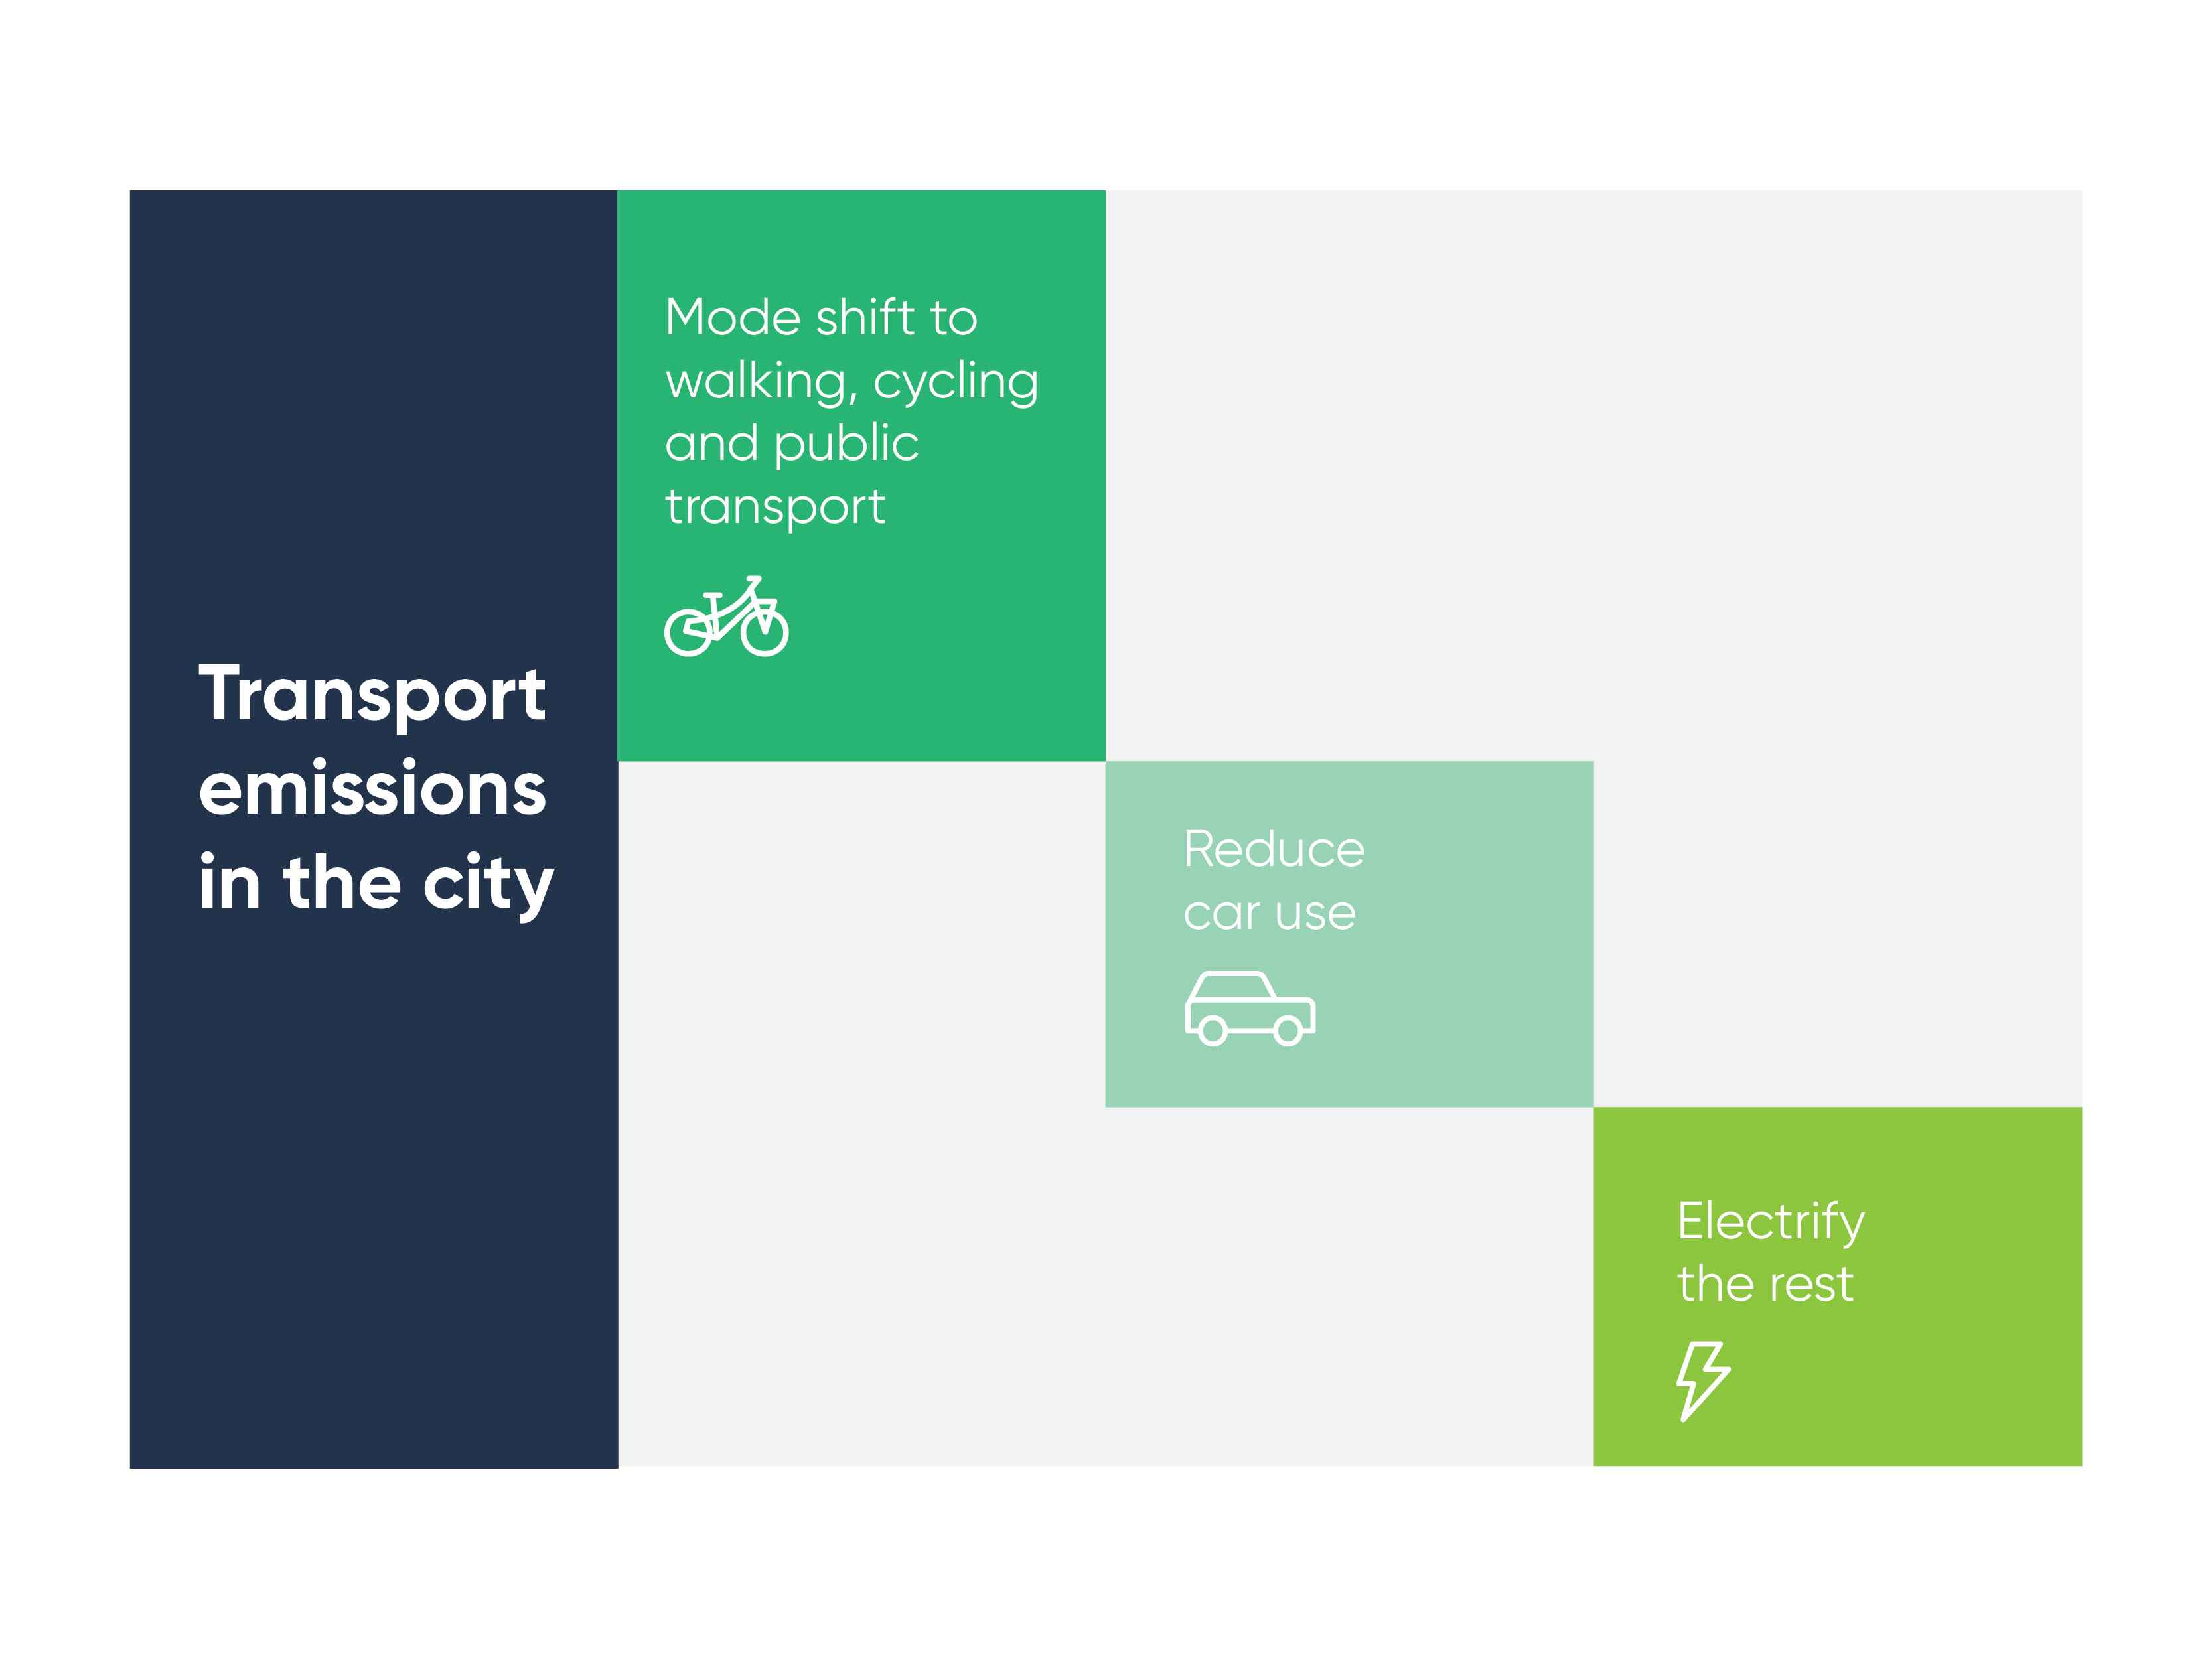 What impacts transport emissions in the city